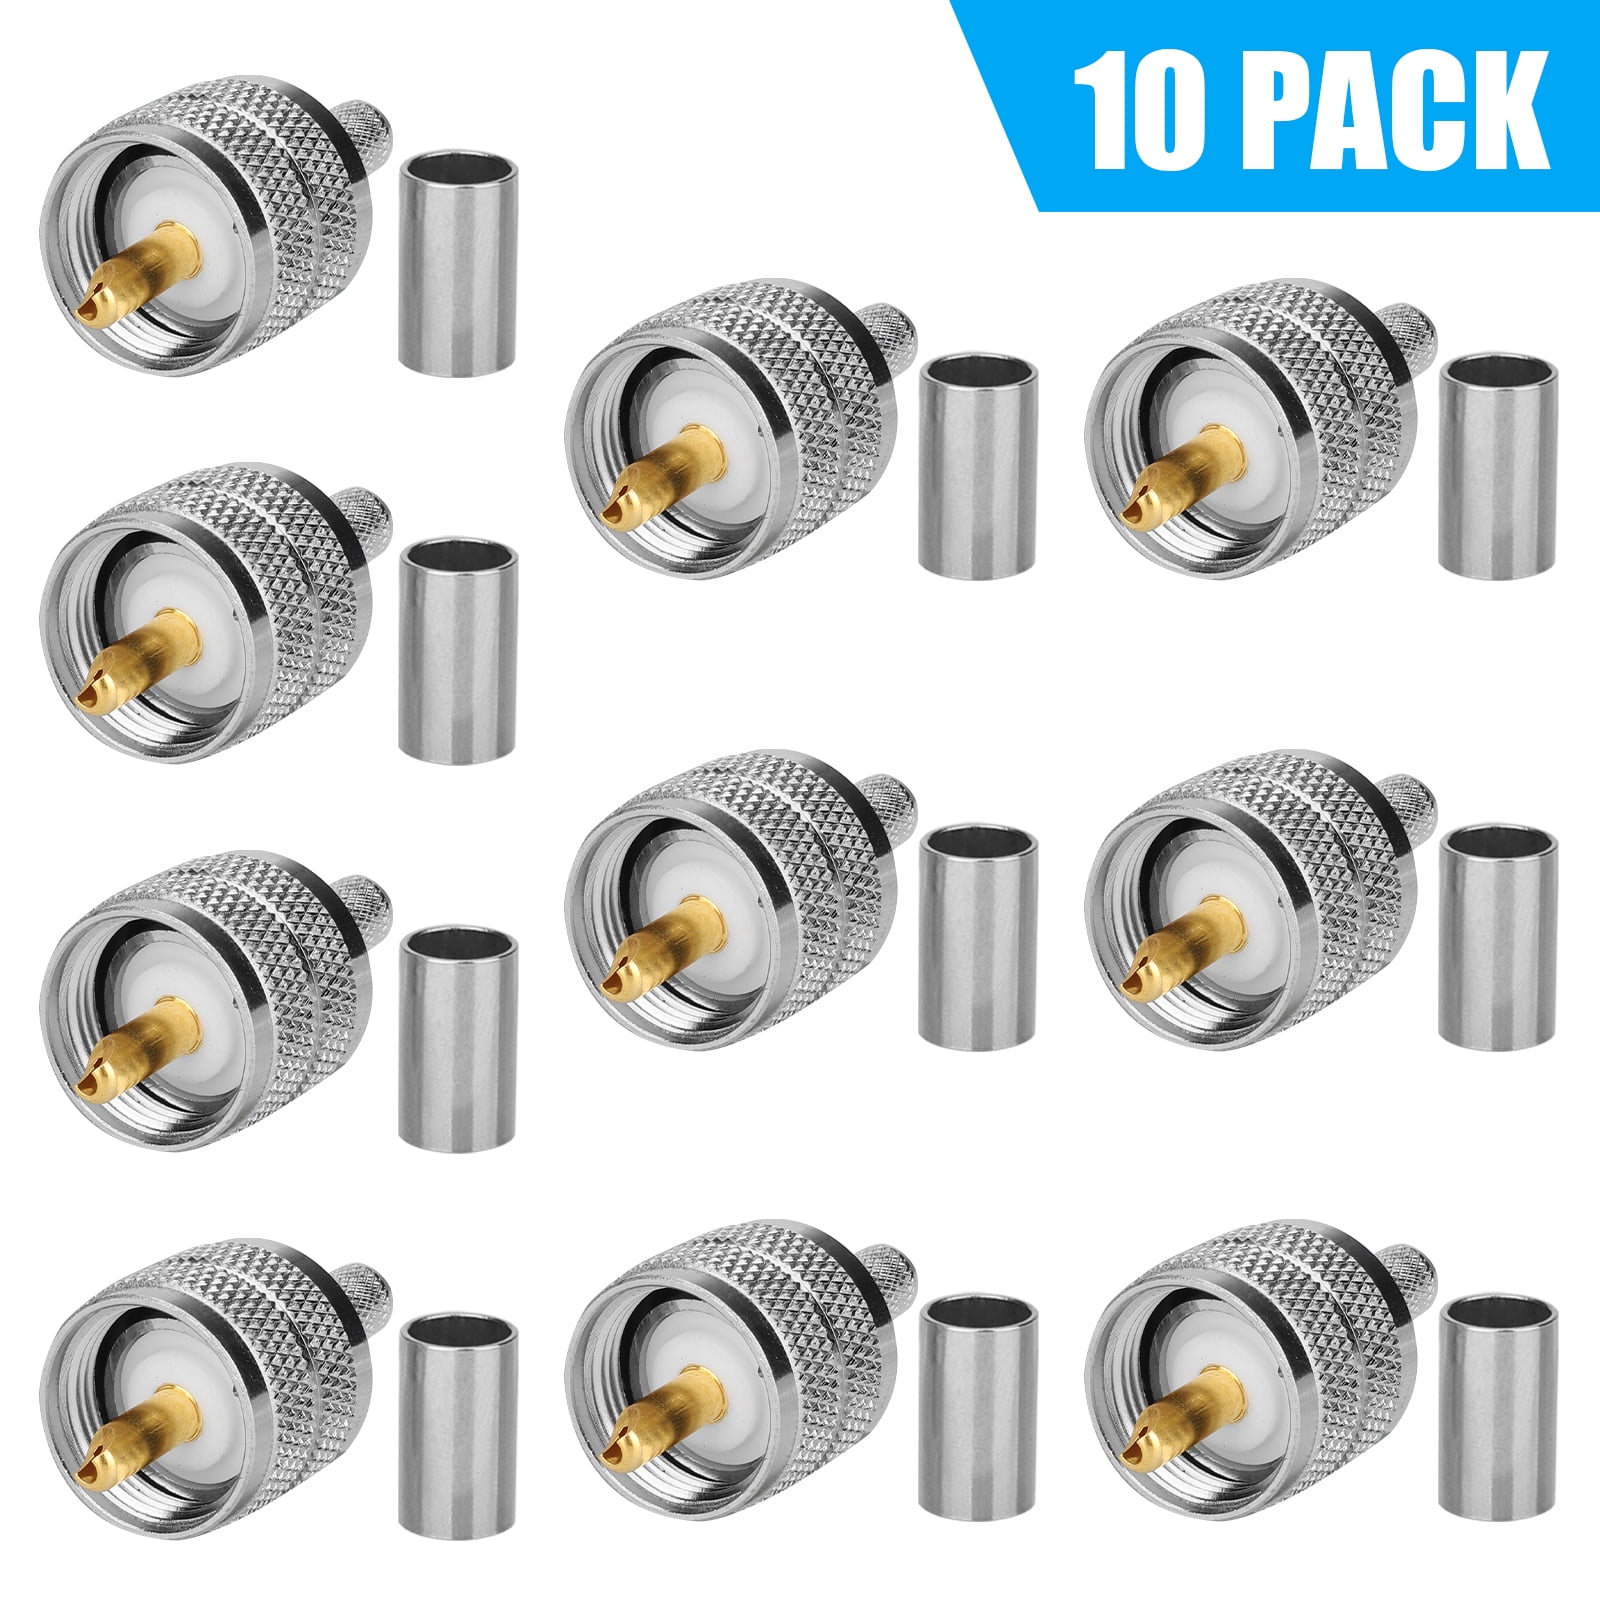 10PACK PL259 Male Solder Connector Plug With Reducer for RG8X Coaxial Coax Cable 